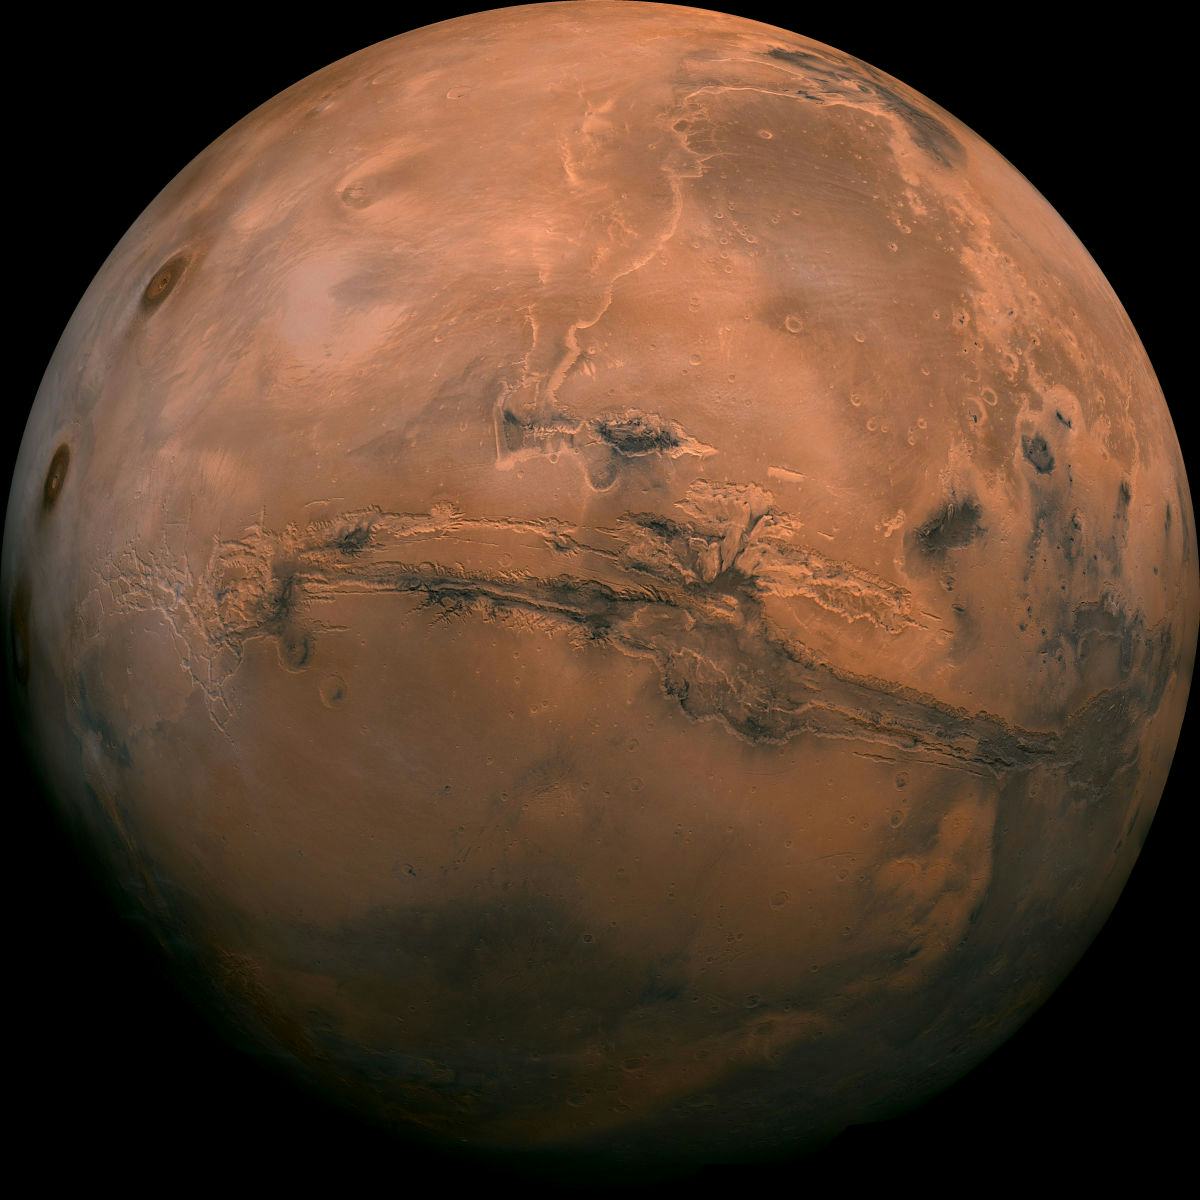 photo of the planet Mars